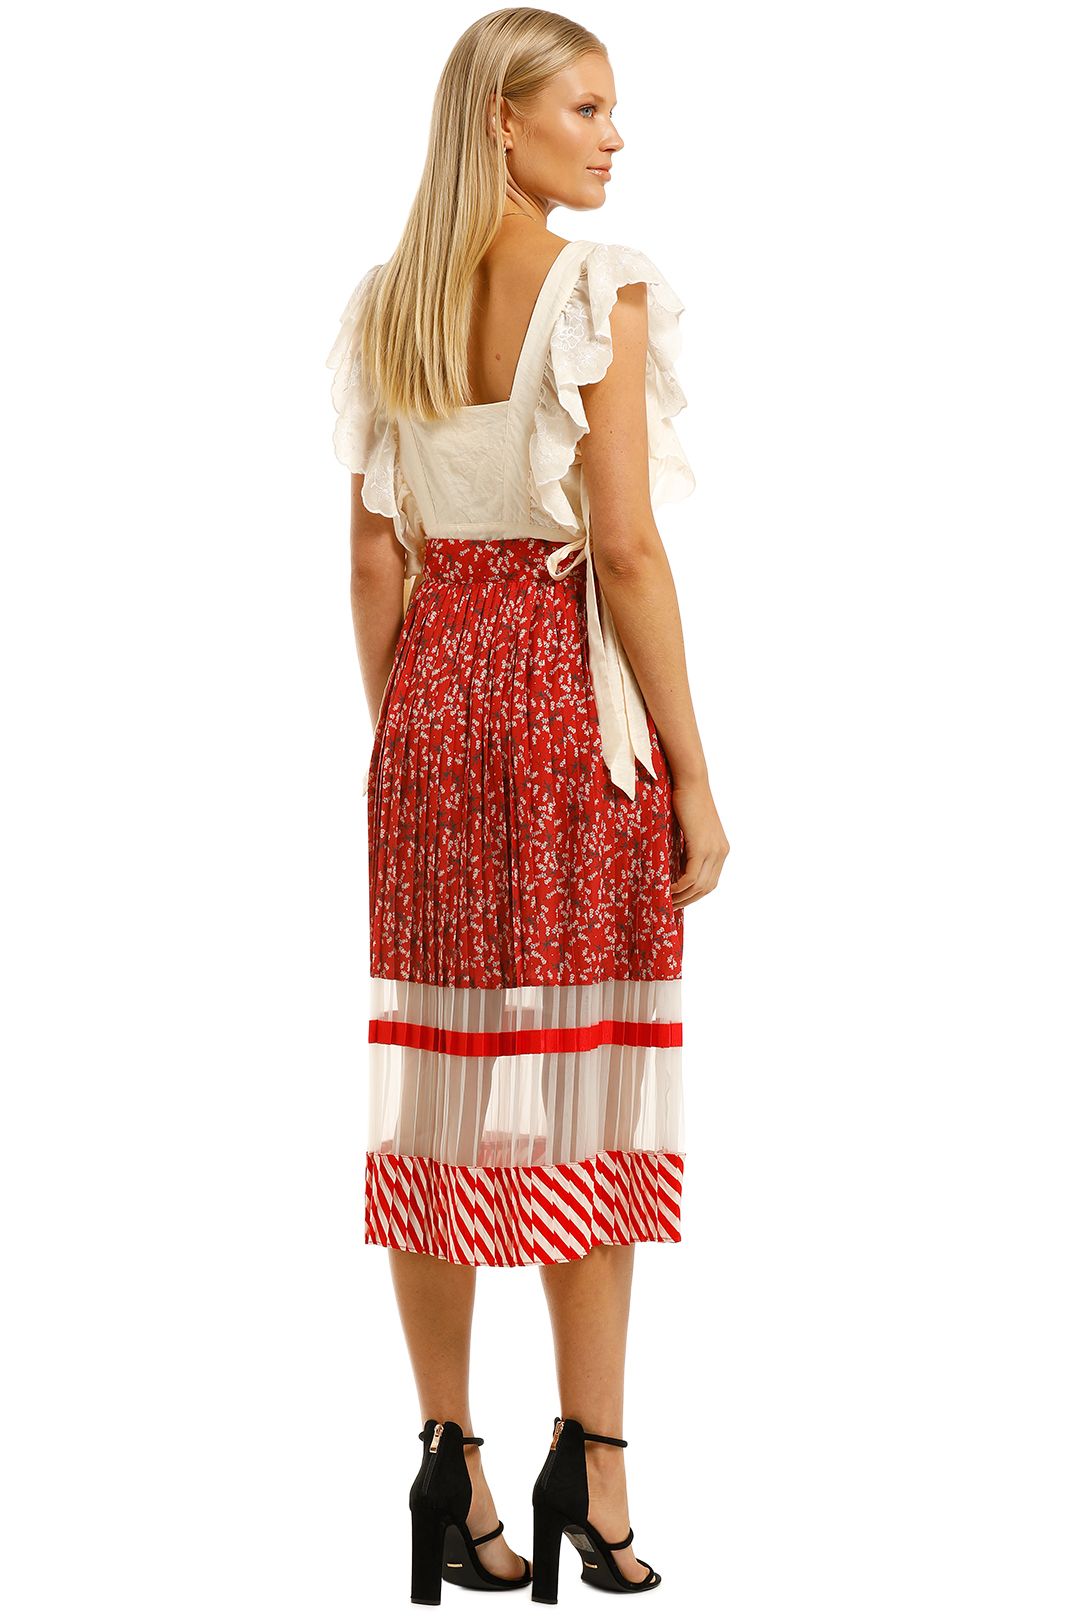 Curate-by-Trelise-Cooper-Hot Pleat-Skirt-Red-Back